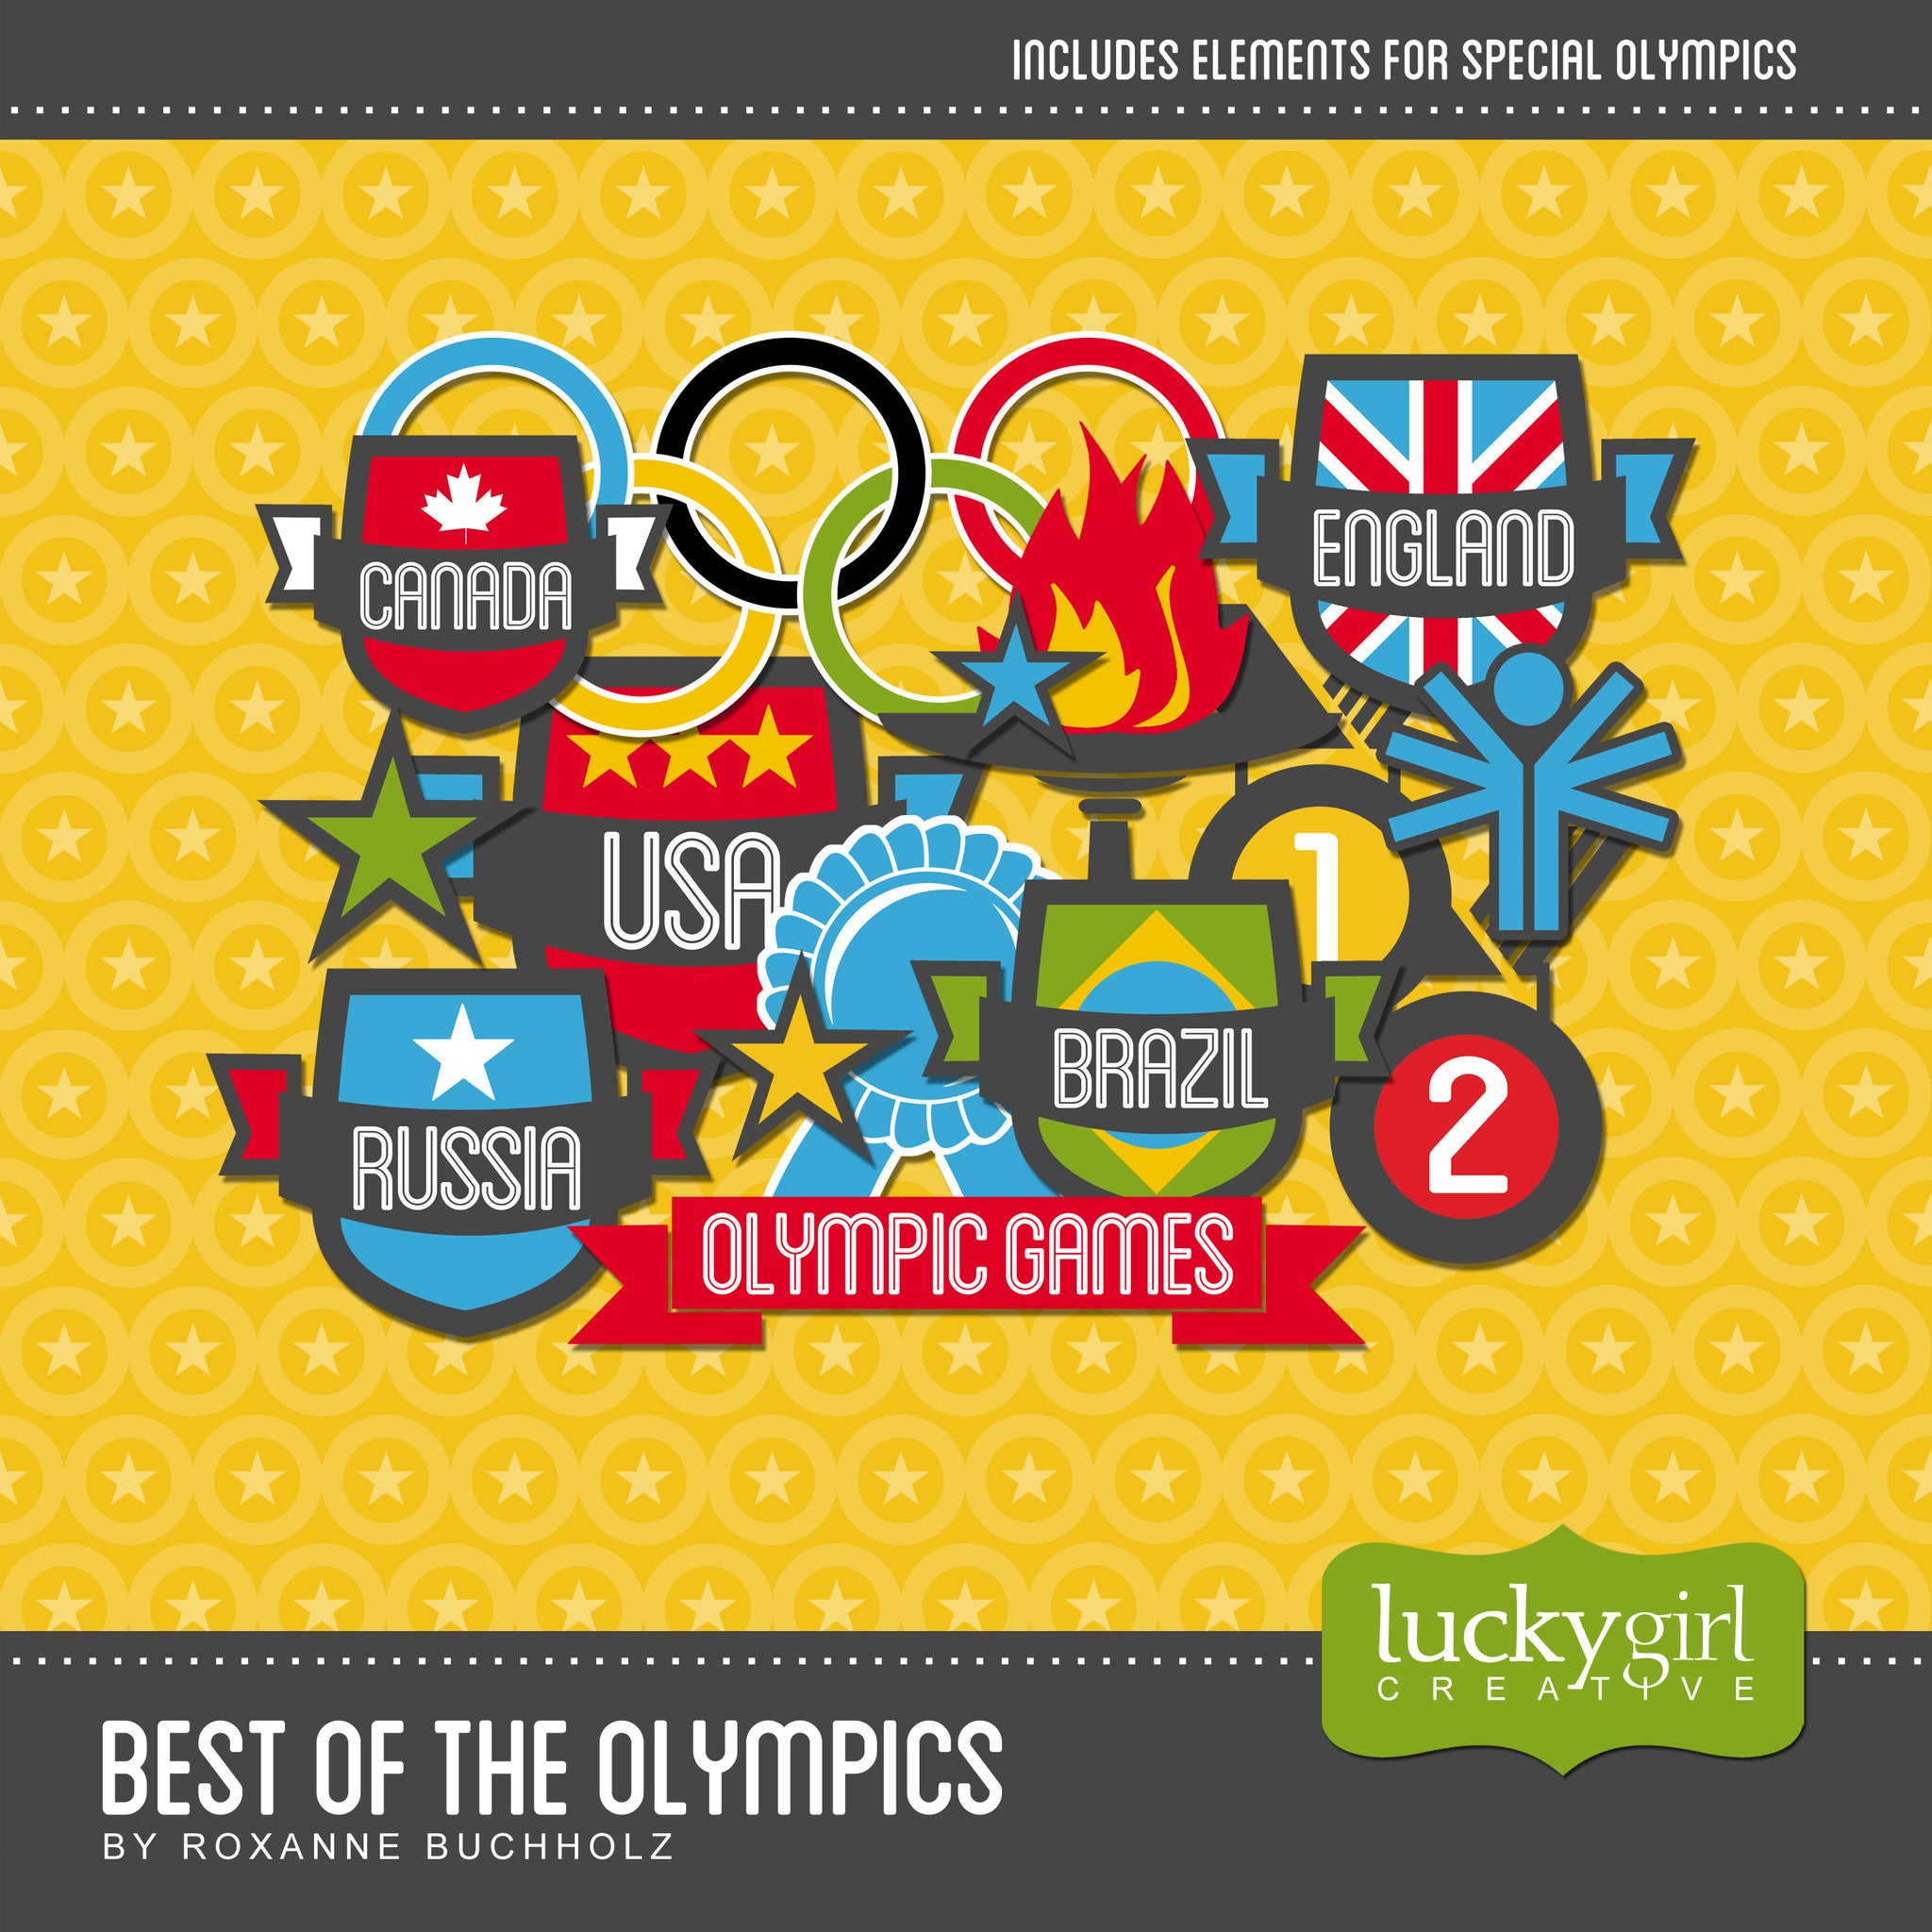 The Best of the Olympics Digital Scrapbook Kit contains sports and travel related digital art, including insignia for several countries. This collection features bright, fun embellishments crafted with a bold graphic look and extends its theme and palette to the Russia Digital Scrapbook Kit which focuses on the overall Russian experience. As a bonus, included in the kit, are several Special Olympics embellishments as well.